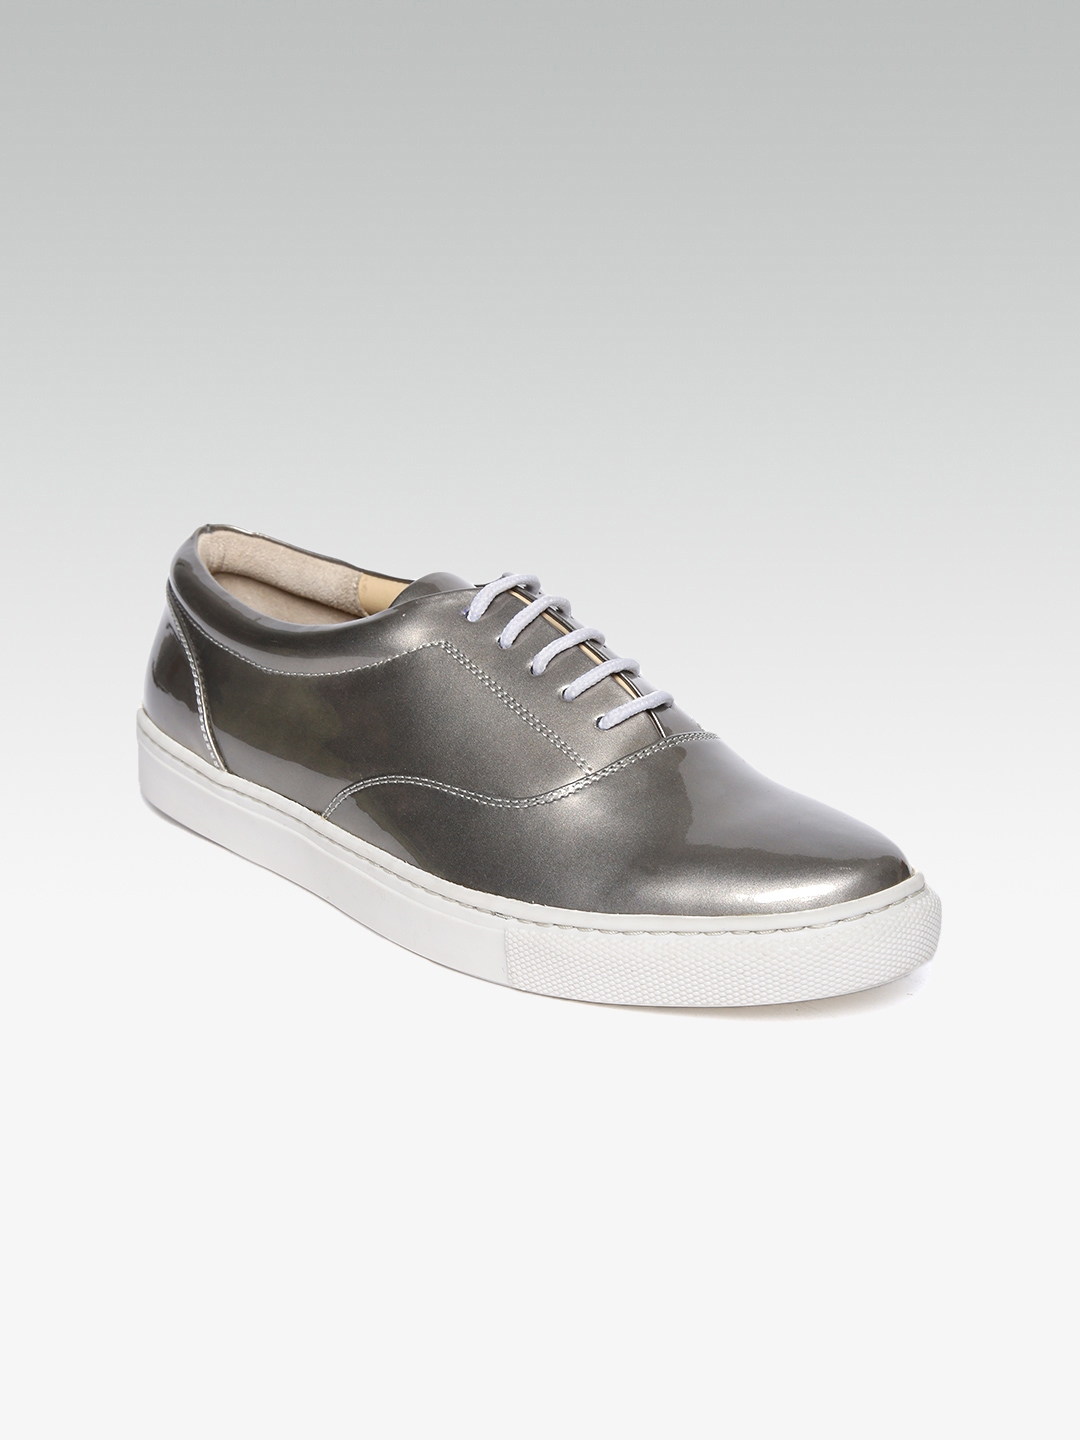 grey leather sneakers womens